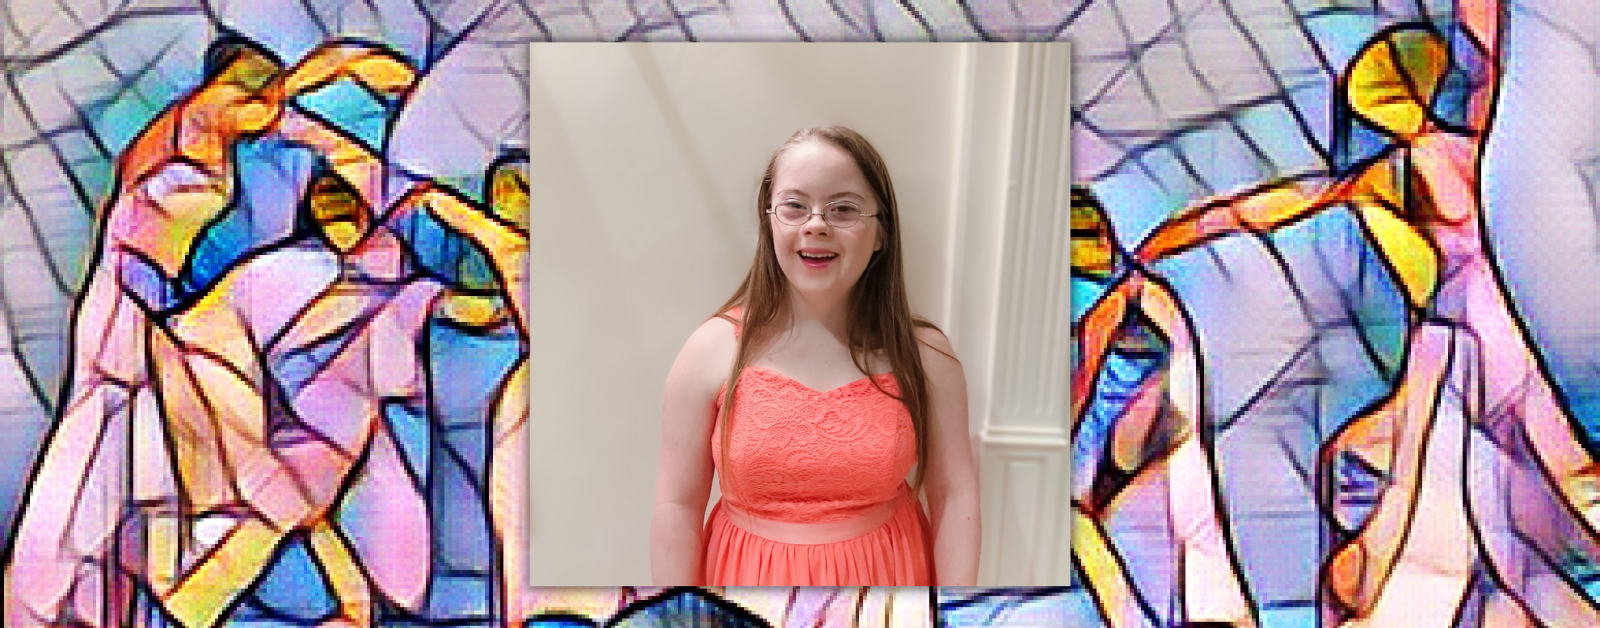 mosaic dancer background with a picture overlay of Penny smiling at the camera and wearing a peach dress for homecoming